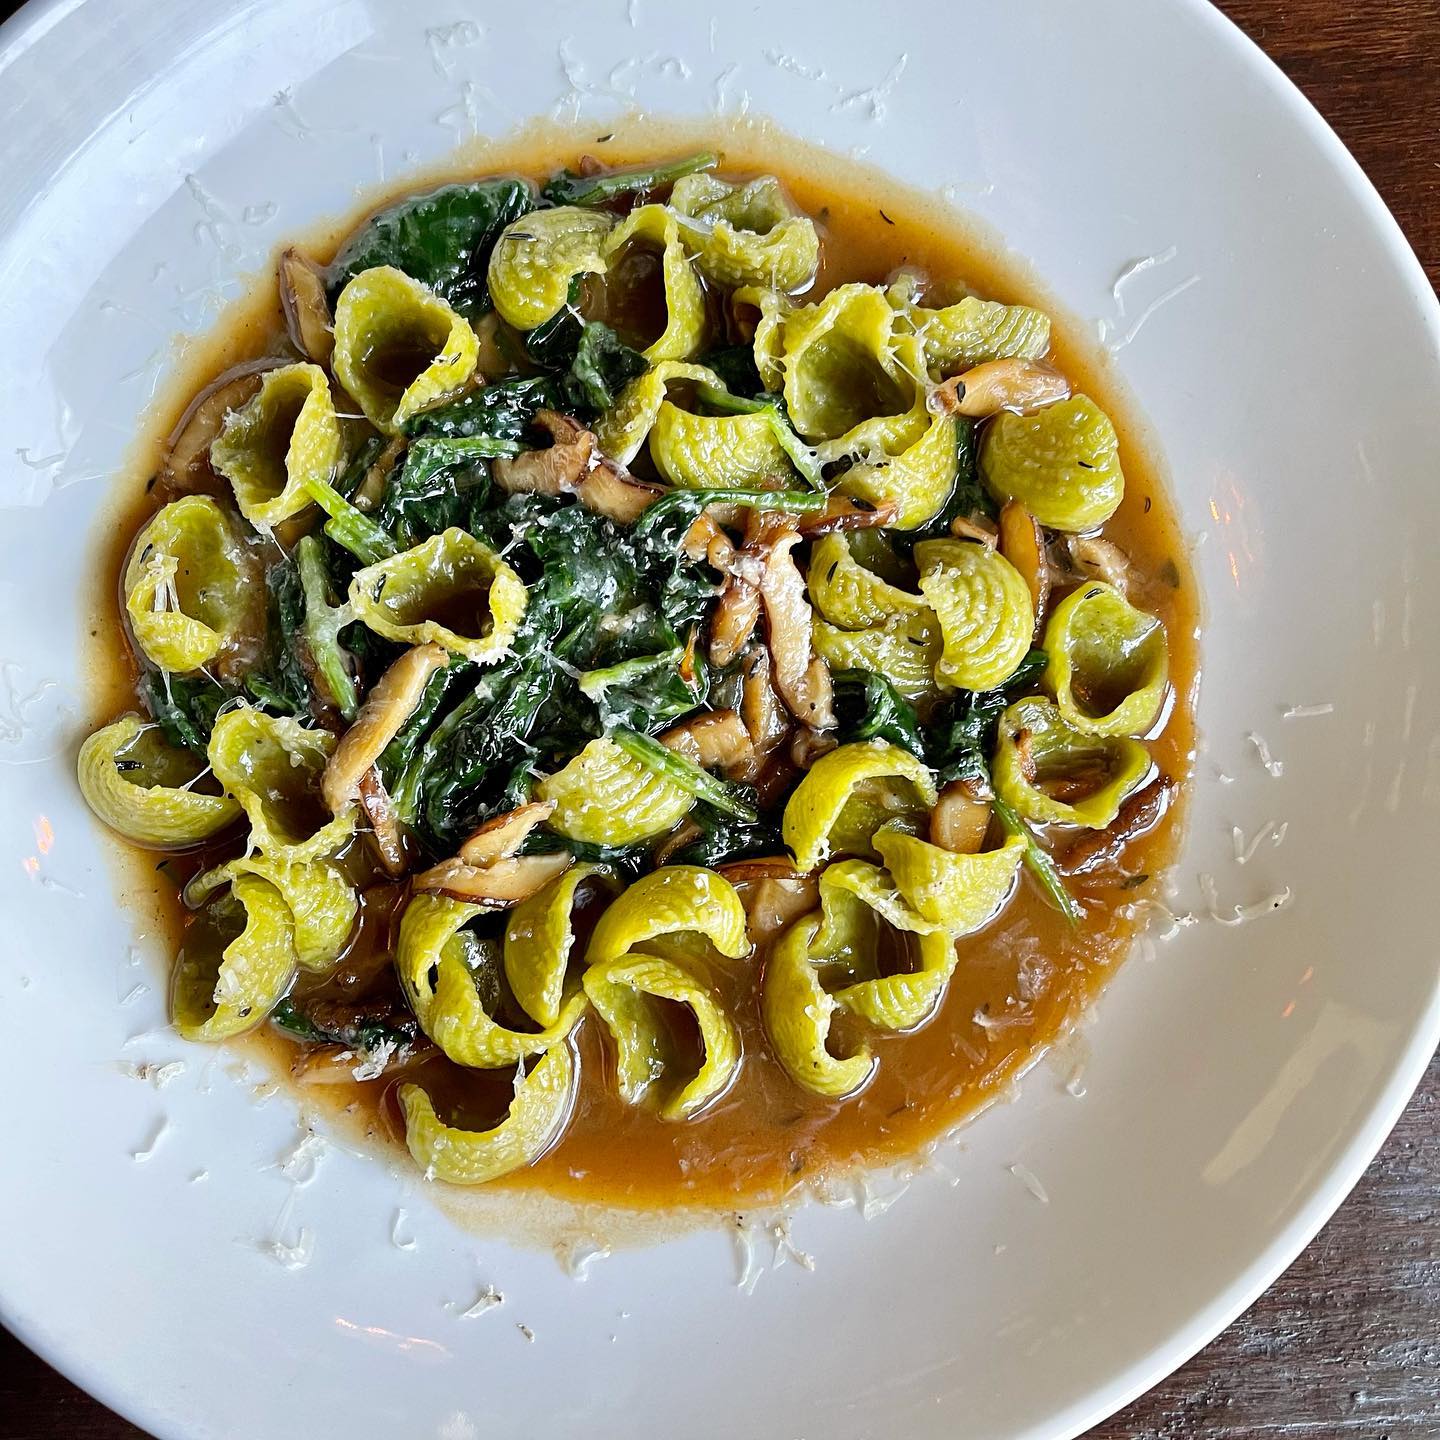 A plate of shell pasta with greens and brown sauce.